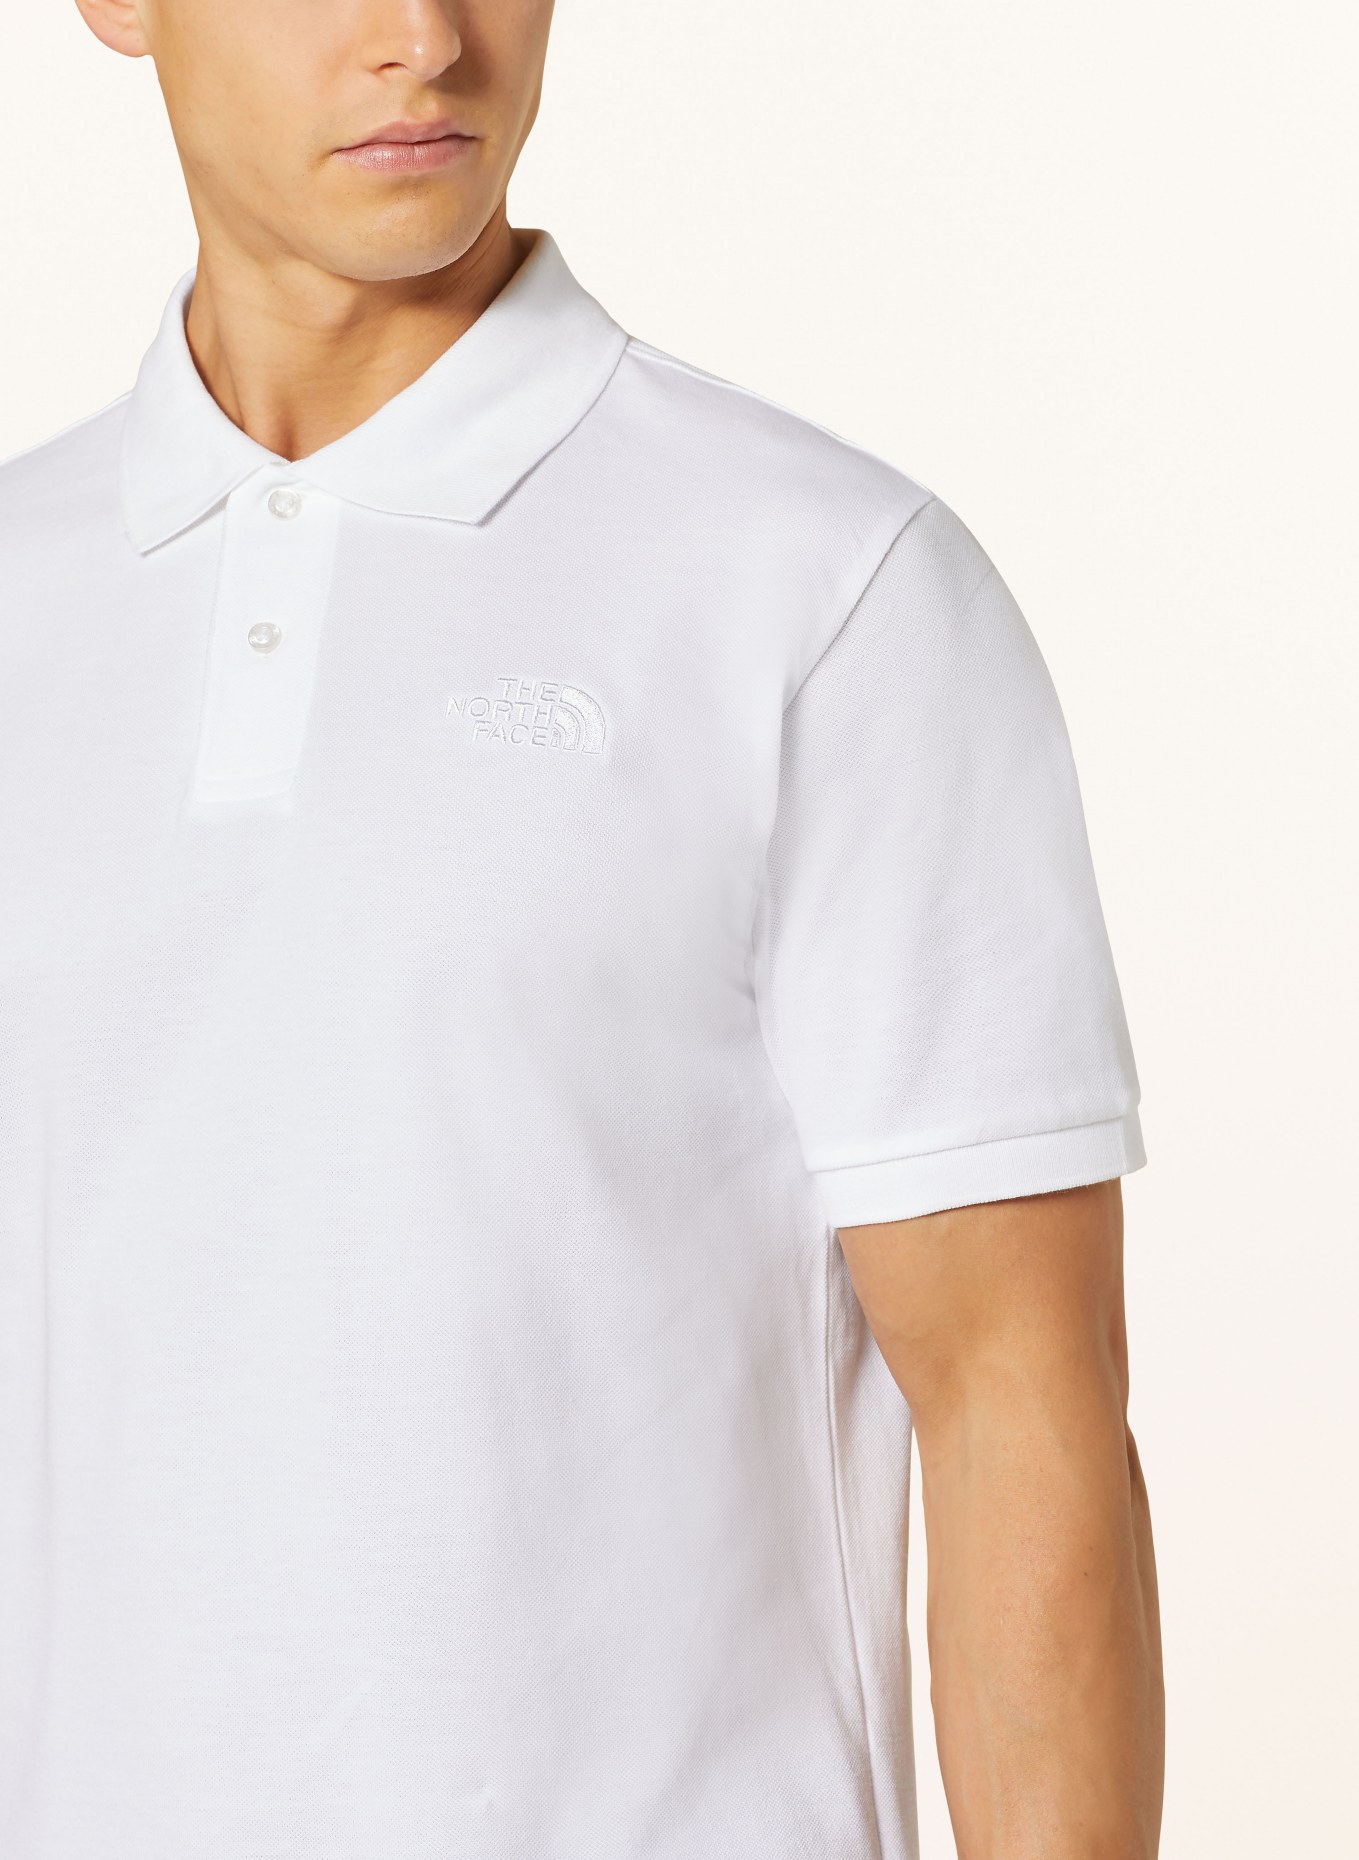 THE NORTH FACE Funktions-Poloshirt, Farbe: WEISS (Bild 4)